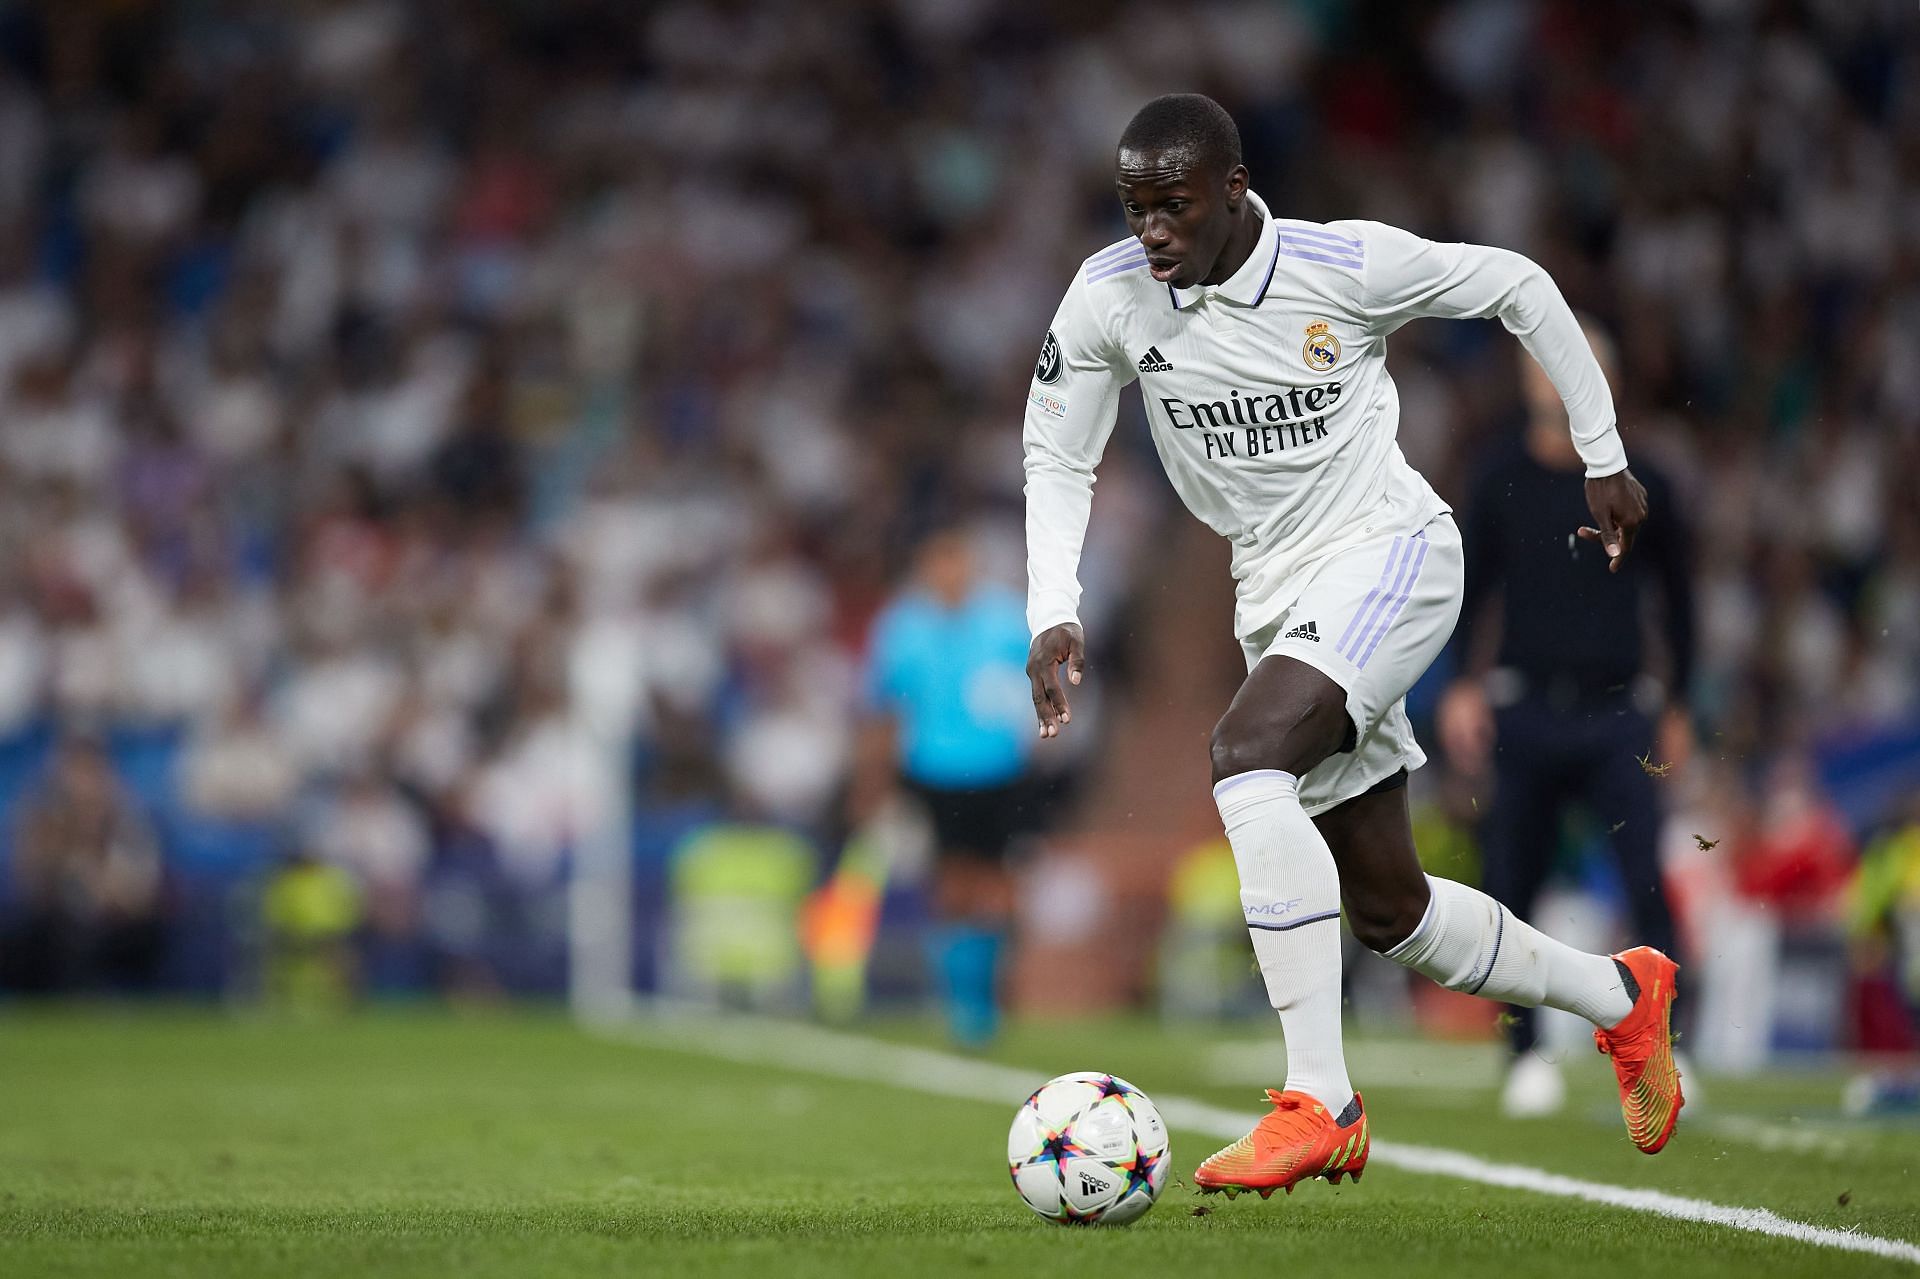 Ferland Mendy is linked with a move away from the Santiago Bernabeu